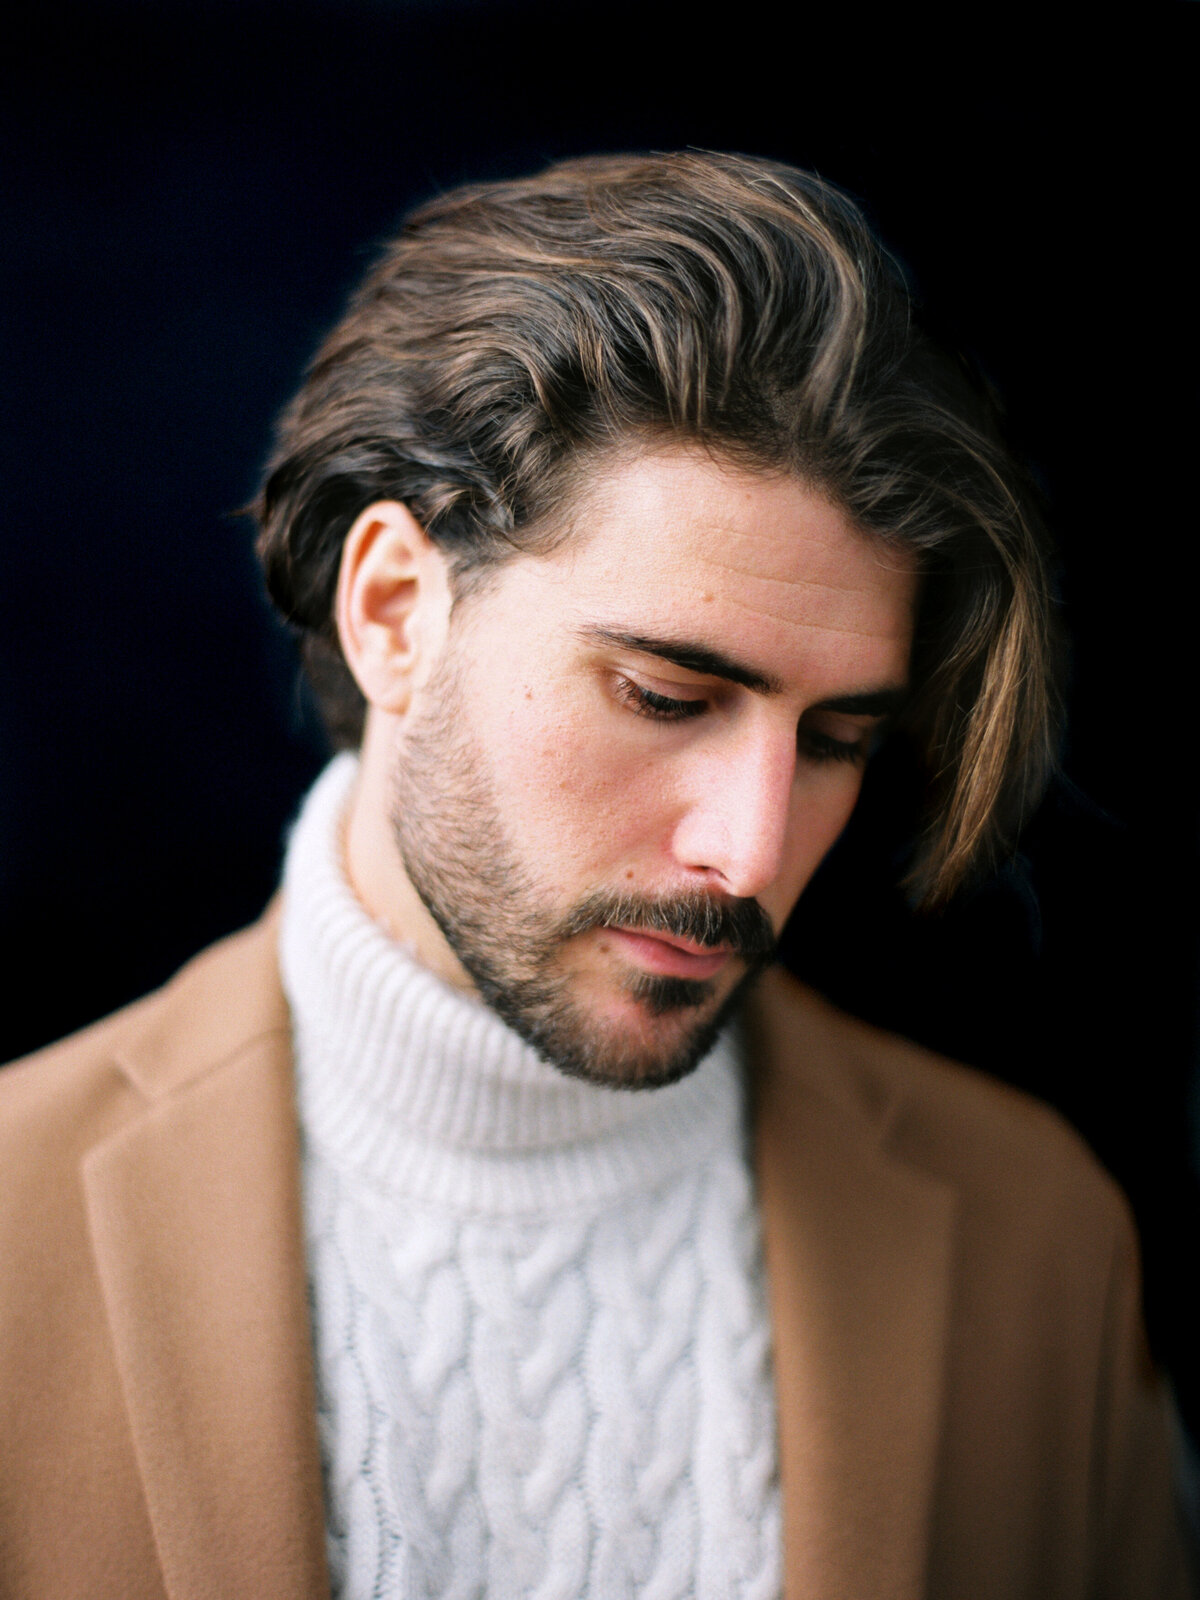 Man looks downward in camel coat and white turtleneck sweater